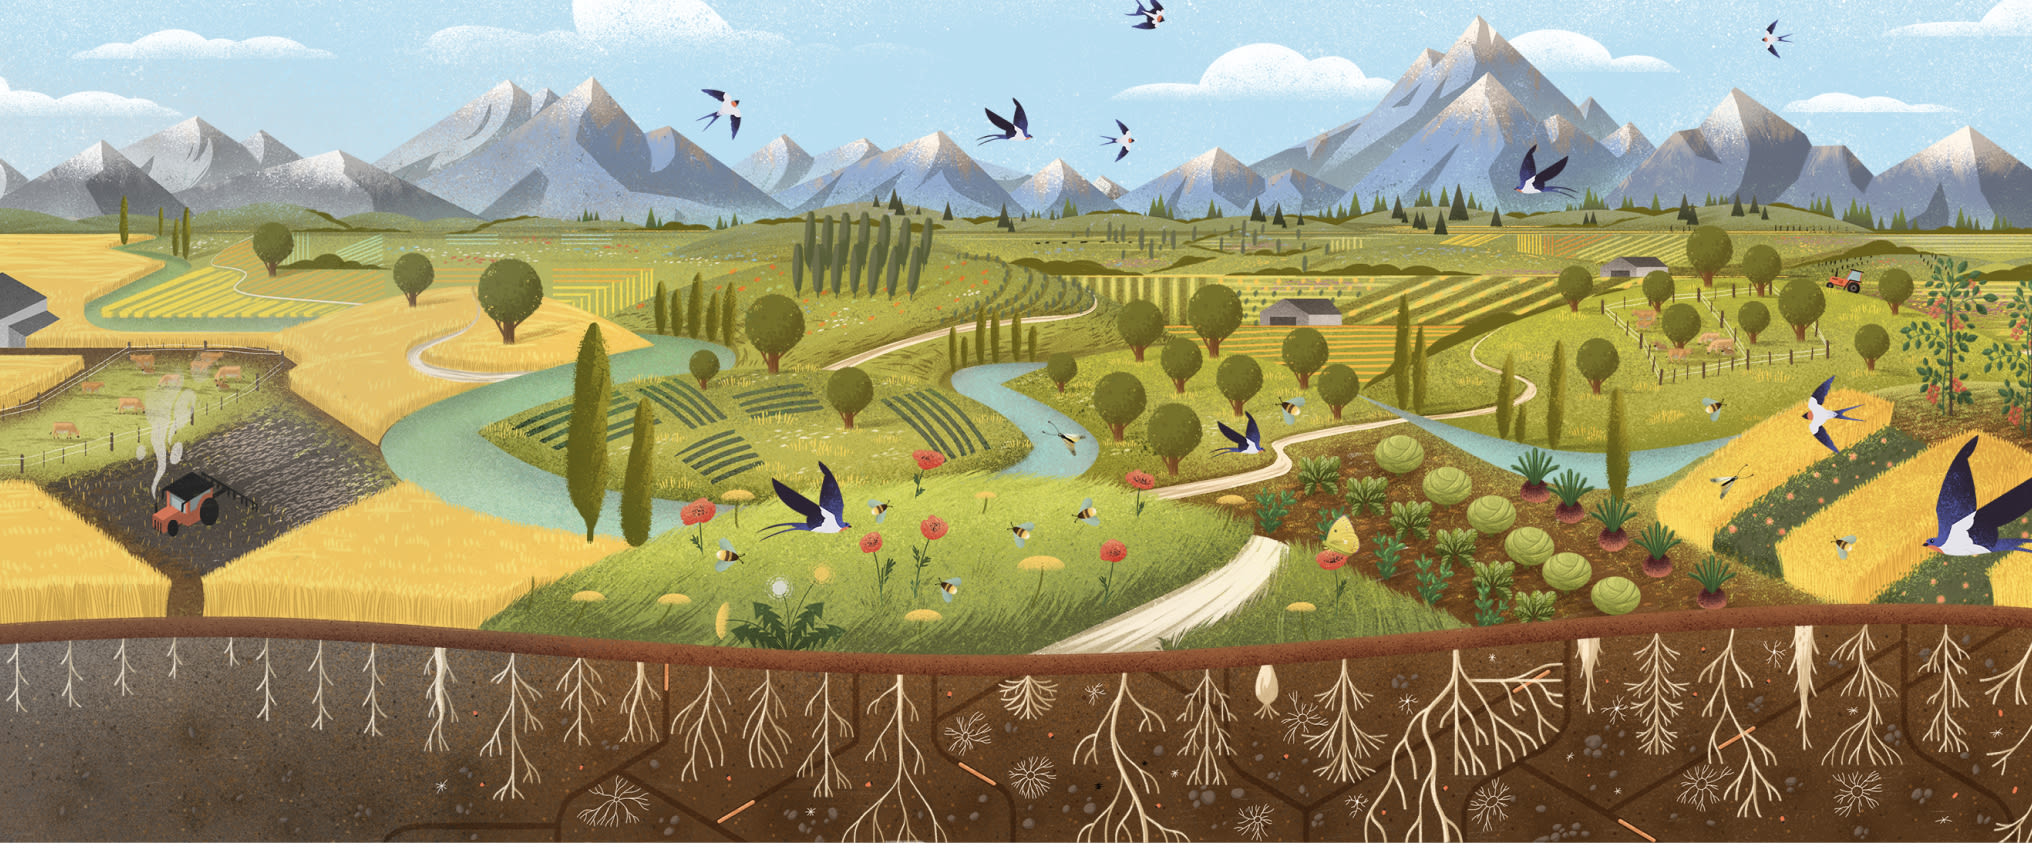 Illustration of hills, mountains and birds